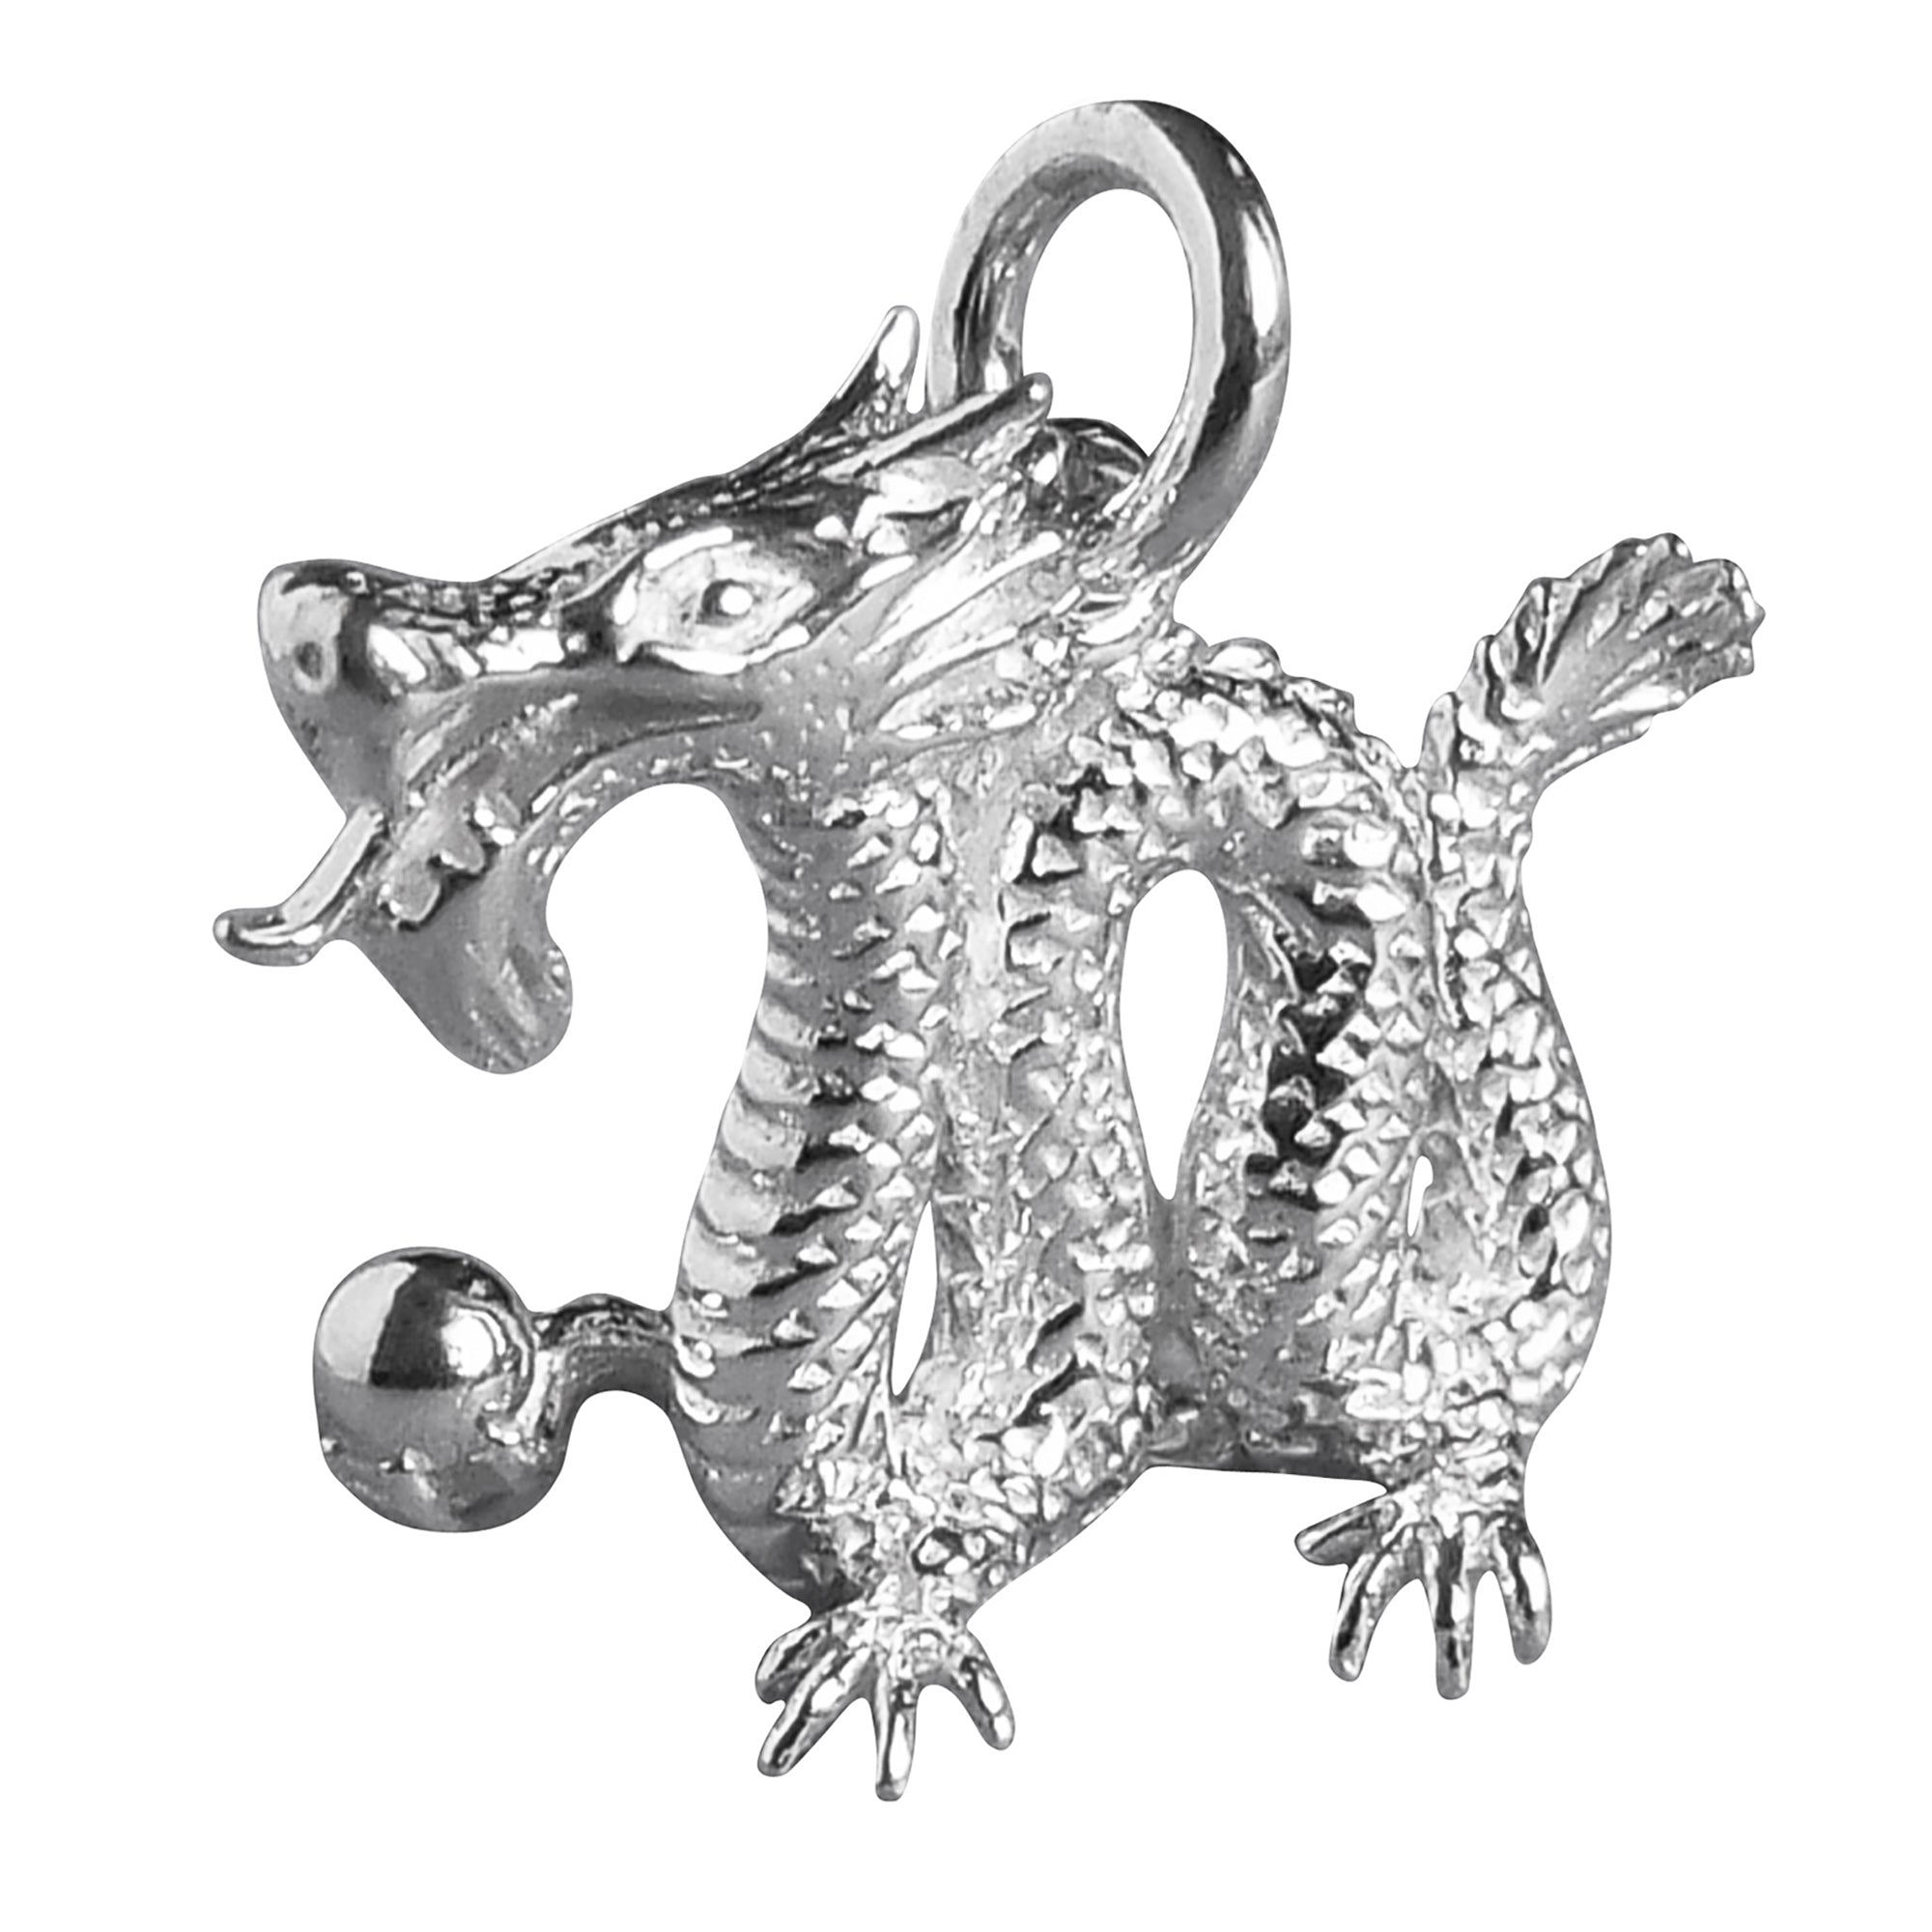 2 Dragon Charms Antique Silver Plated Charms (45x40mm) G22172